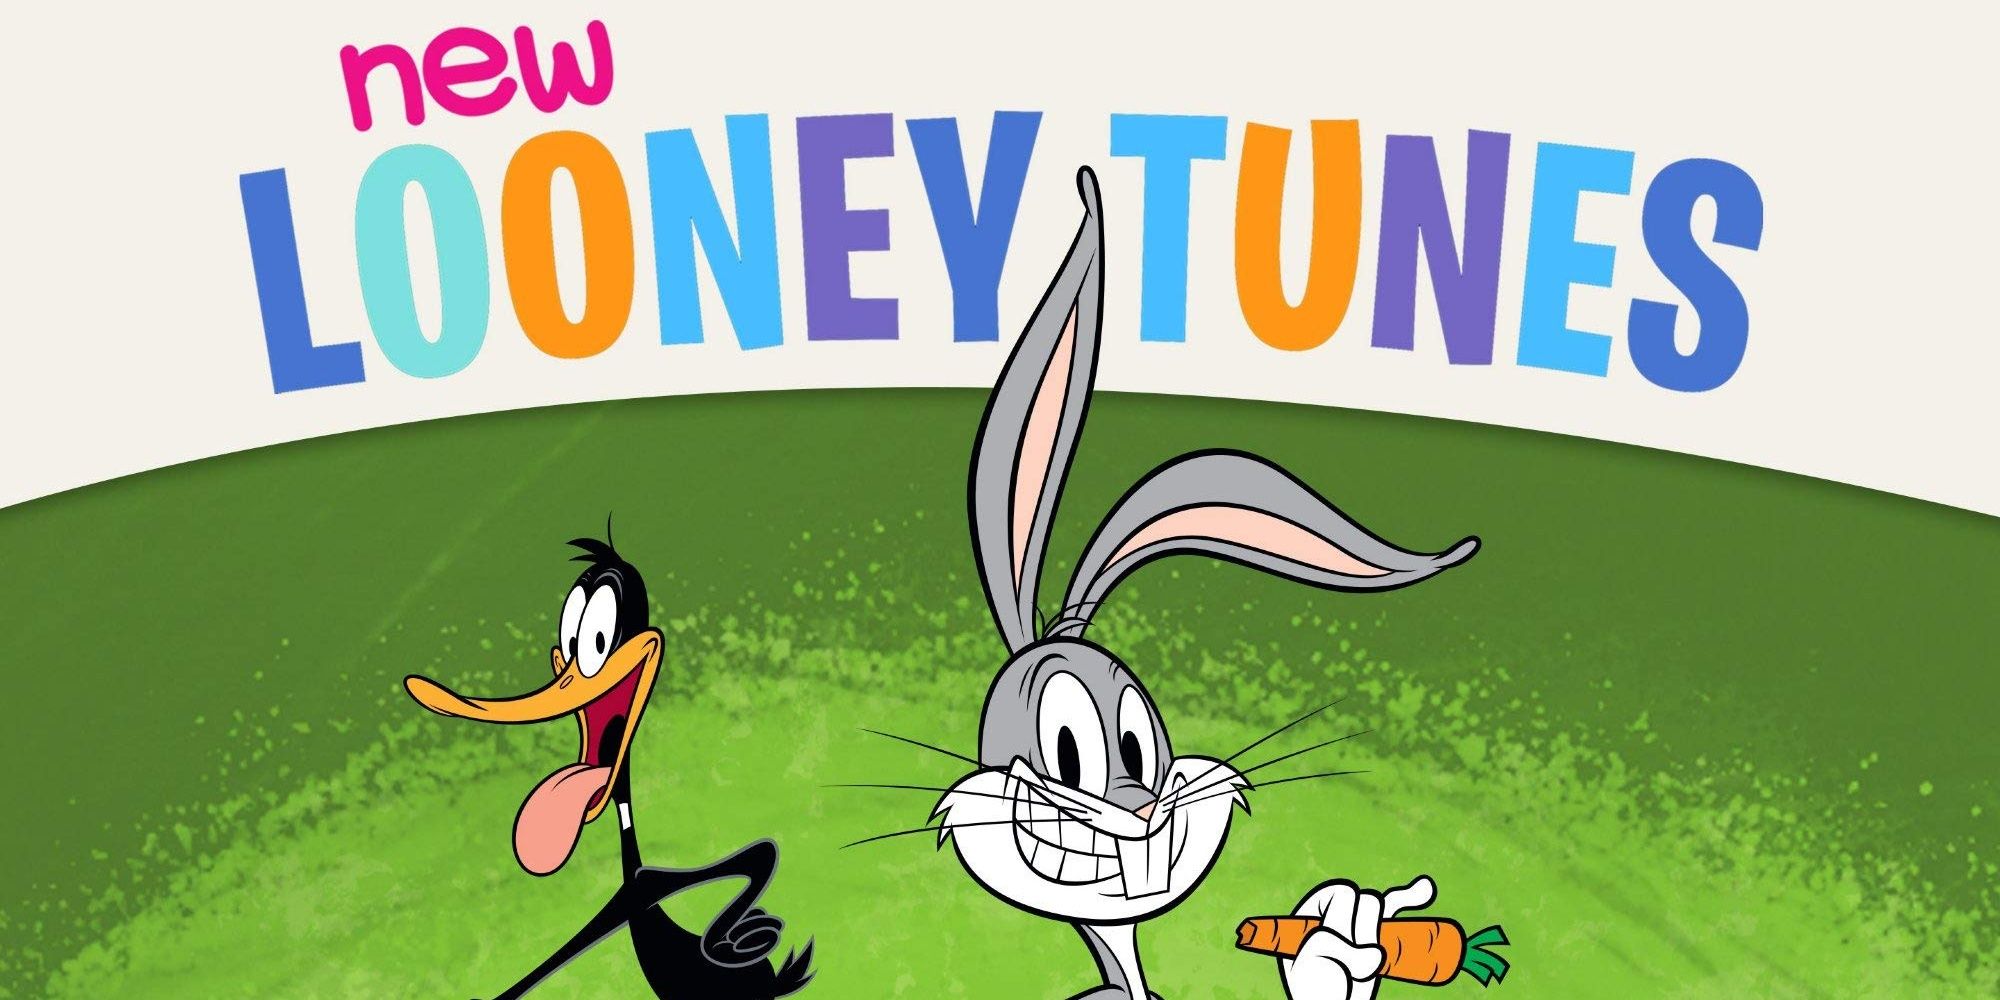 The new &Co.llaboration with Looney Tunes